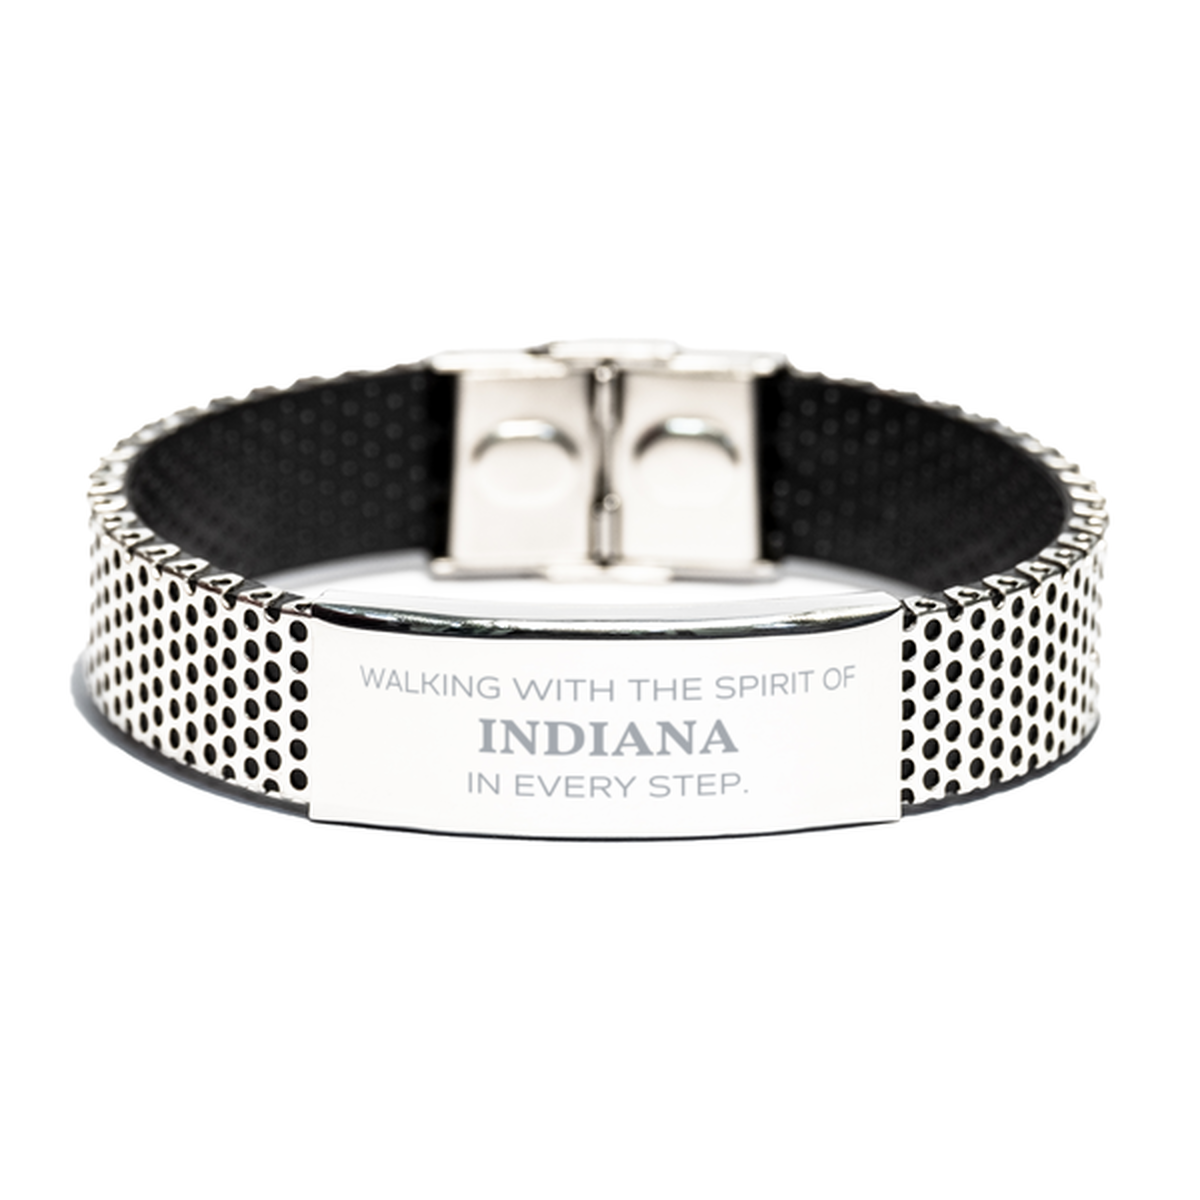 Indiana Gifts, Walking with the spirit, Love Indiana Birthday Christmas Stainless Steel Bracelet For Indiana People, Men, Women, Friends